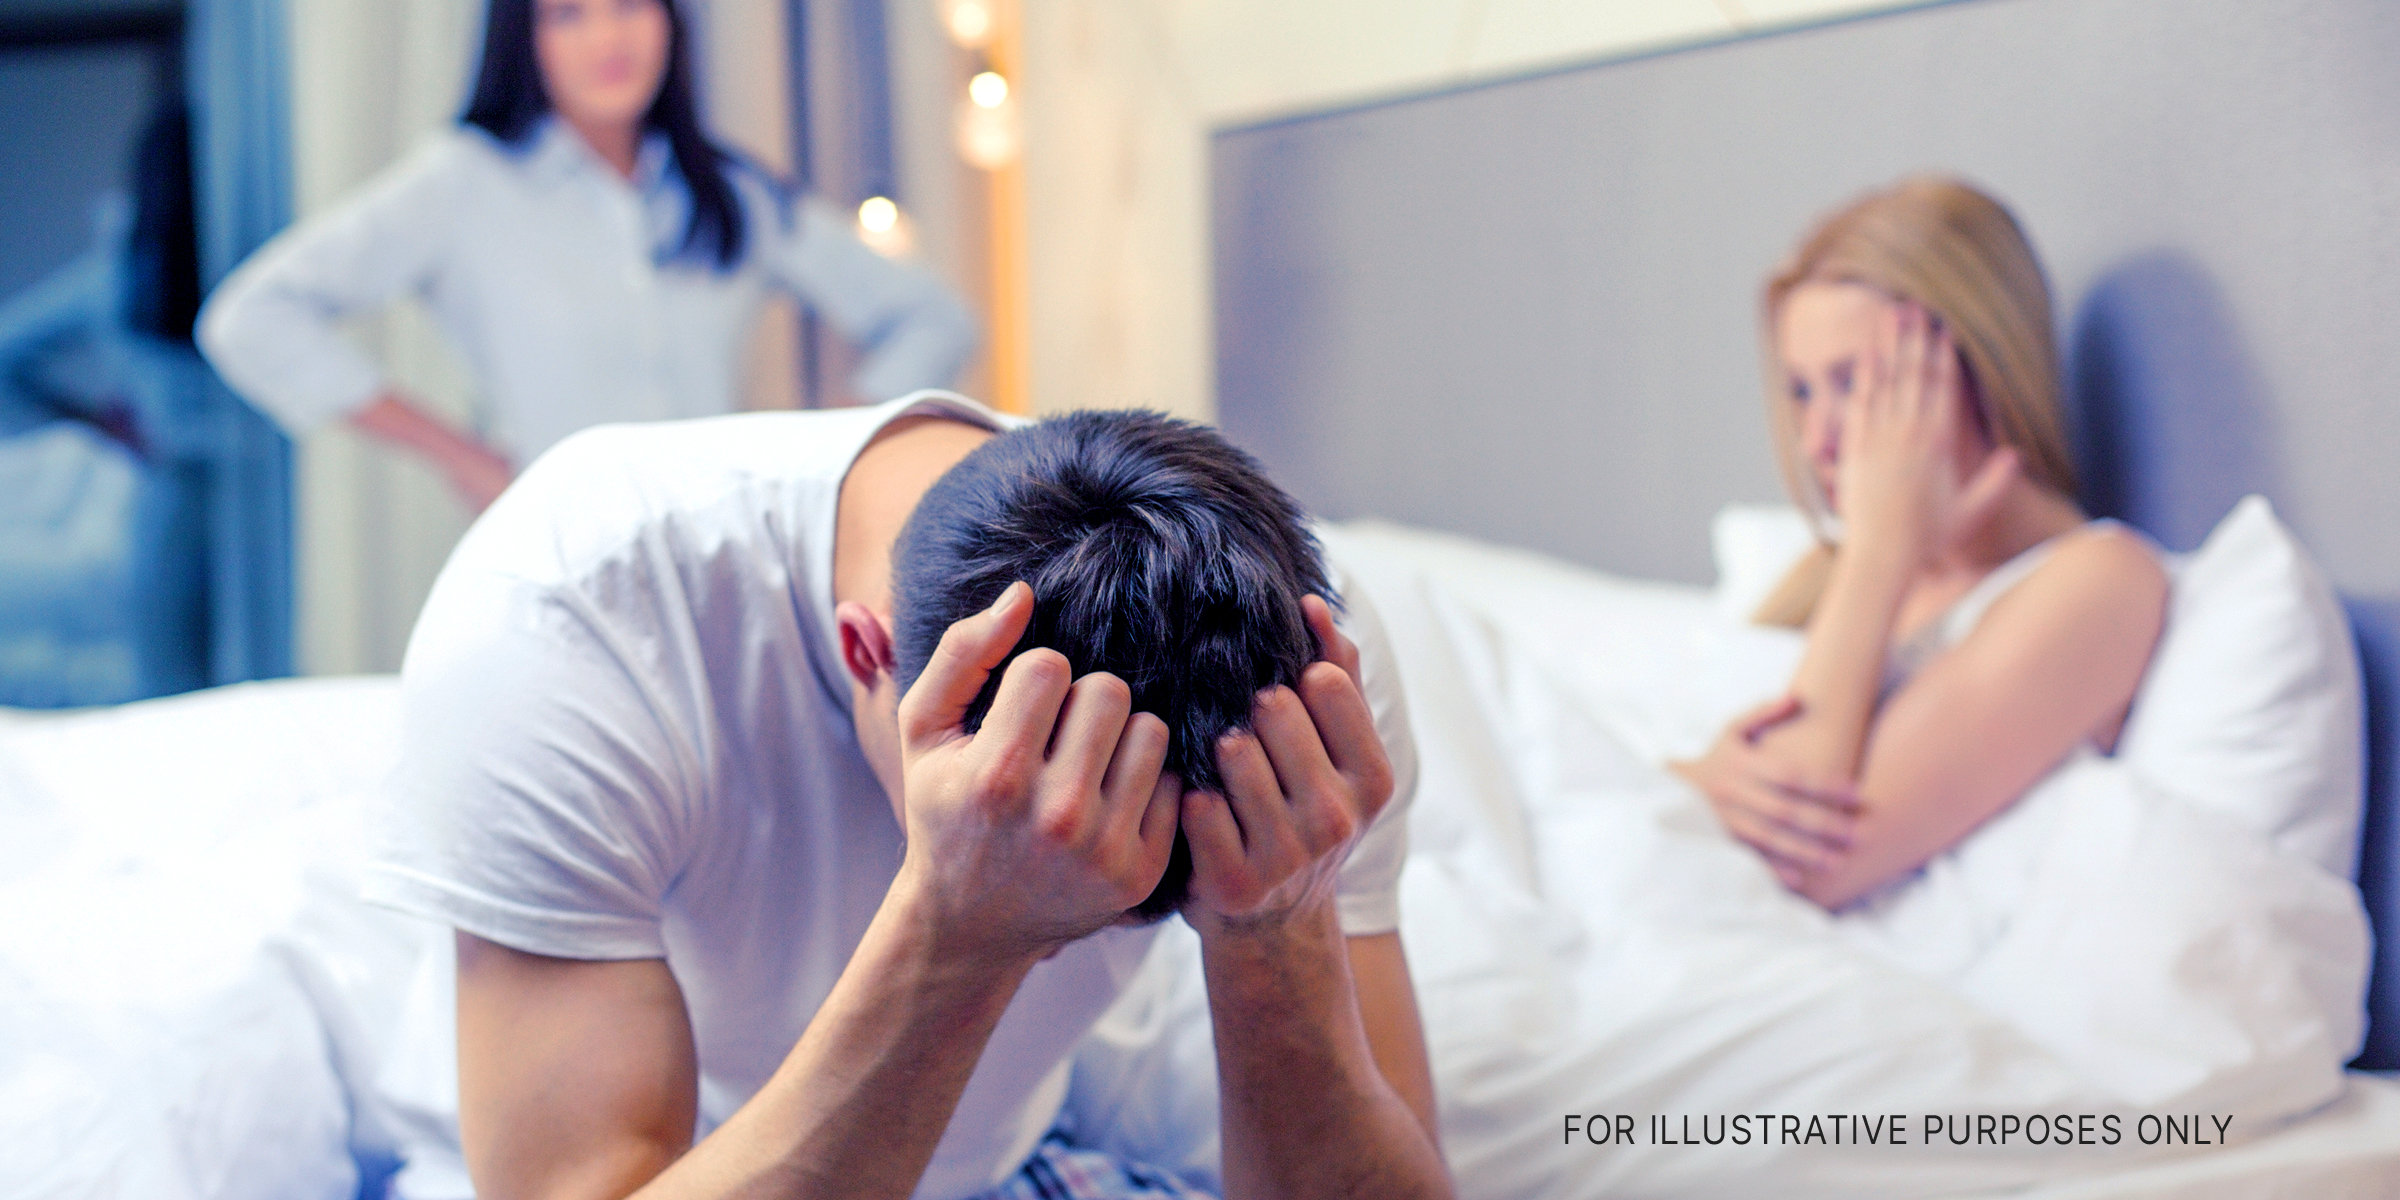 Upset couple and another woman | Source: Shutterstock